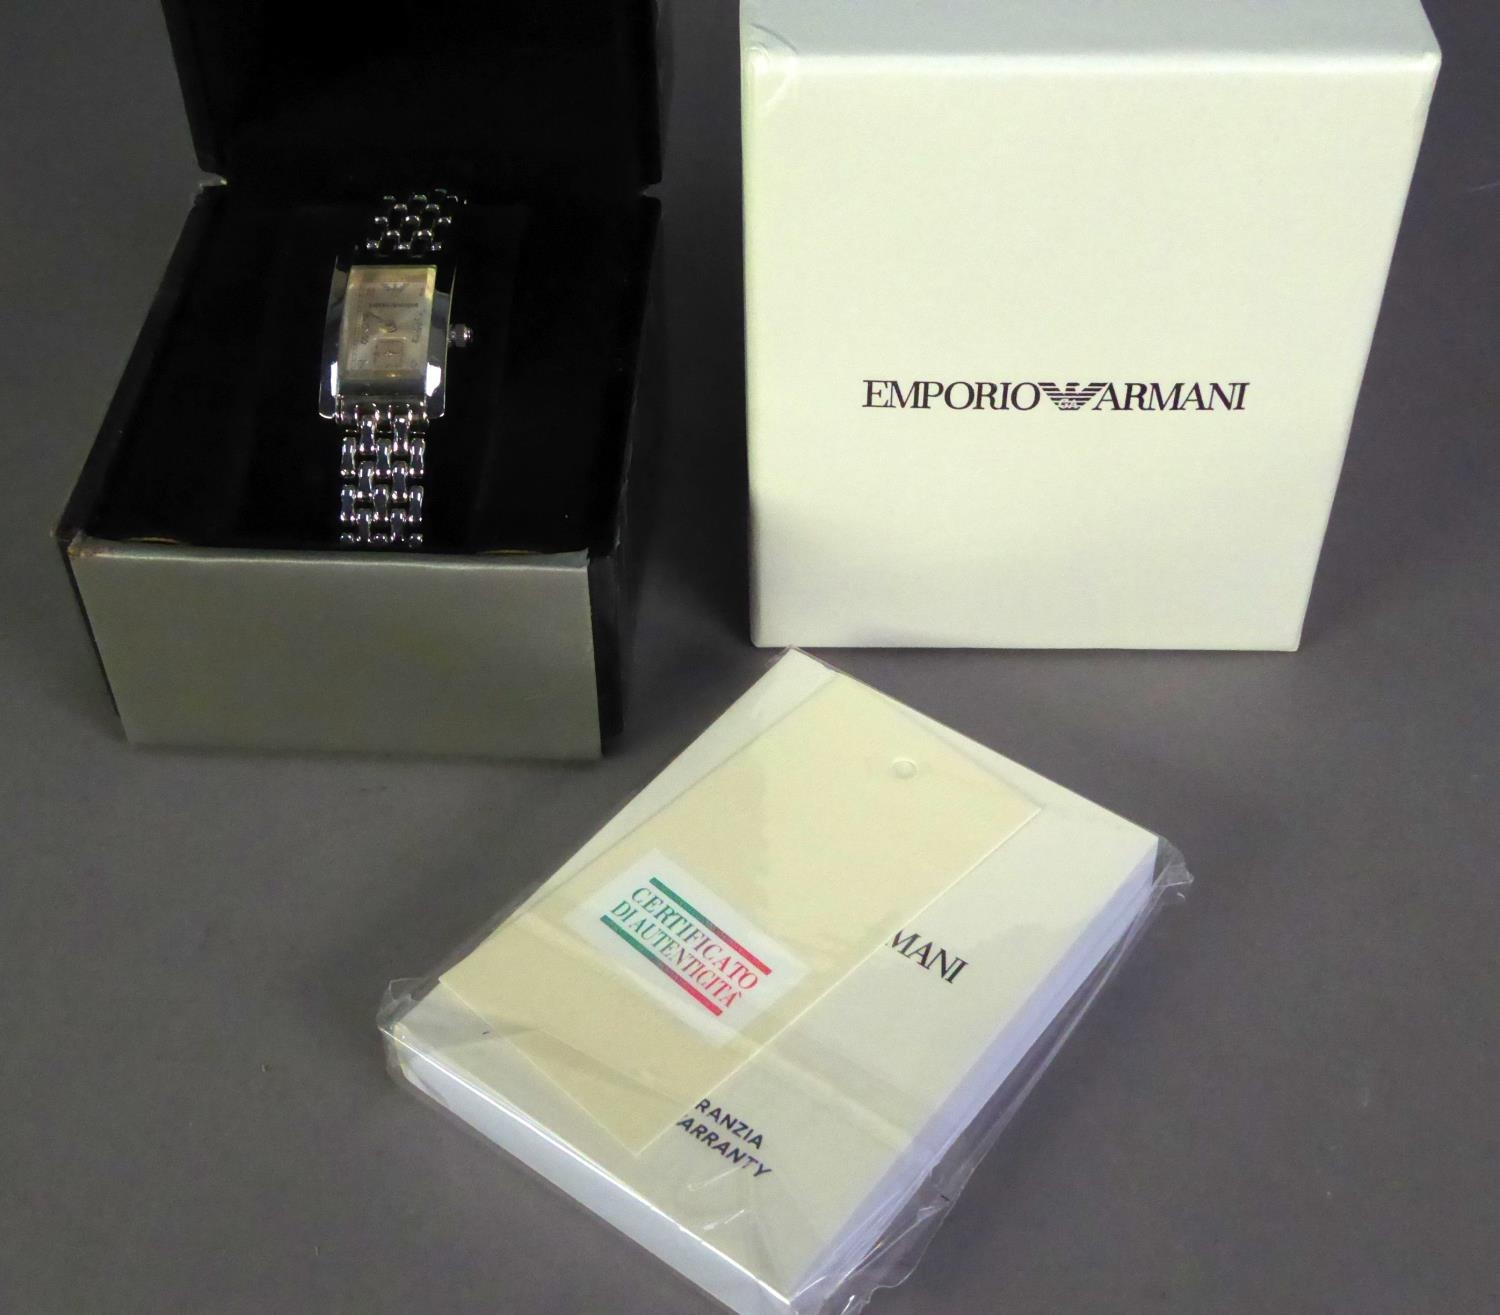 BOXED EMPORIO ARMANI WHITE METAL LADY'S QUARTZ BRACELET WRISTWATCH with certificate, as new - Image 2 of 2